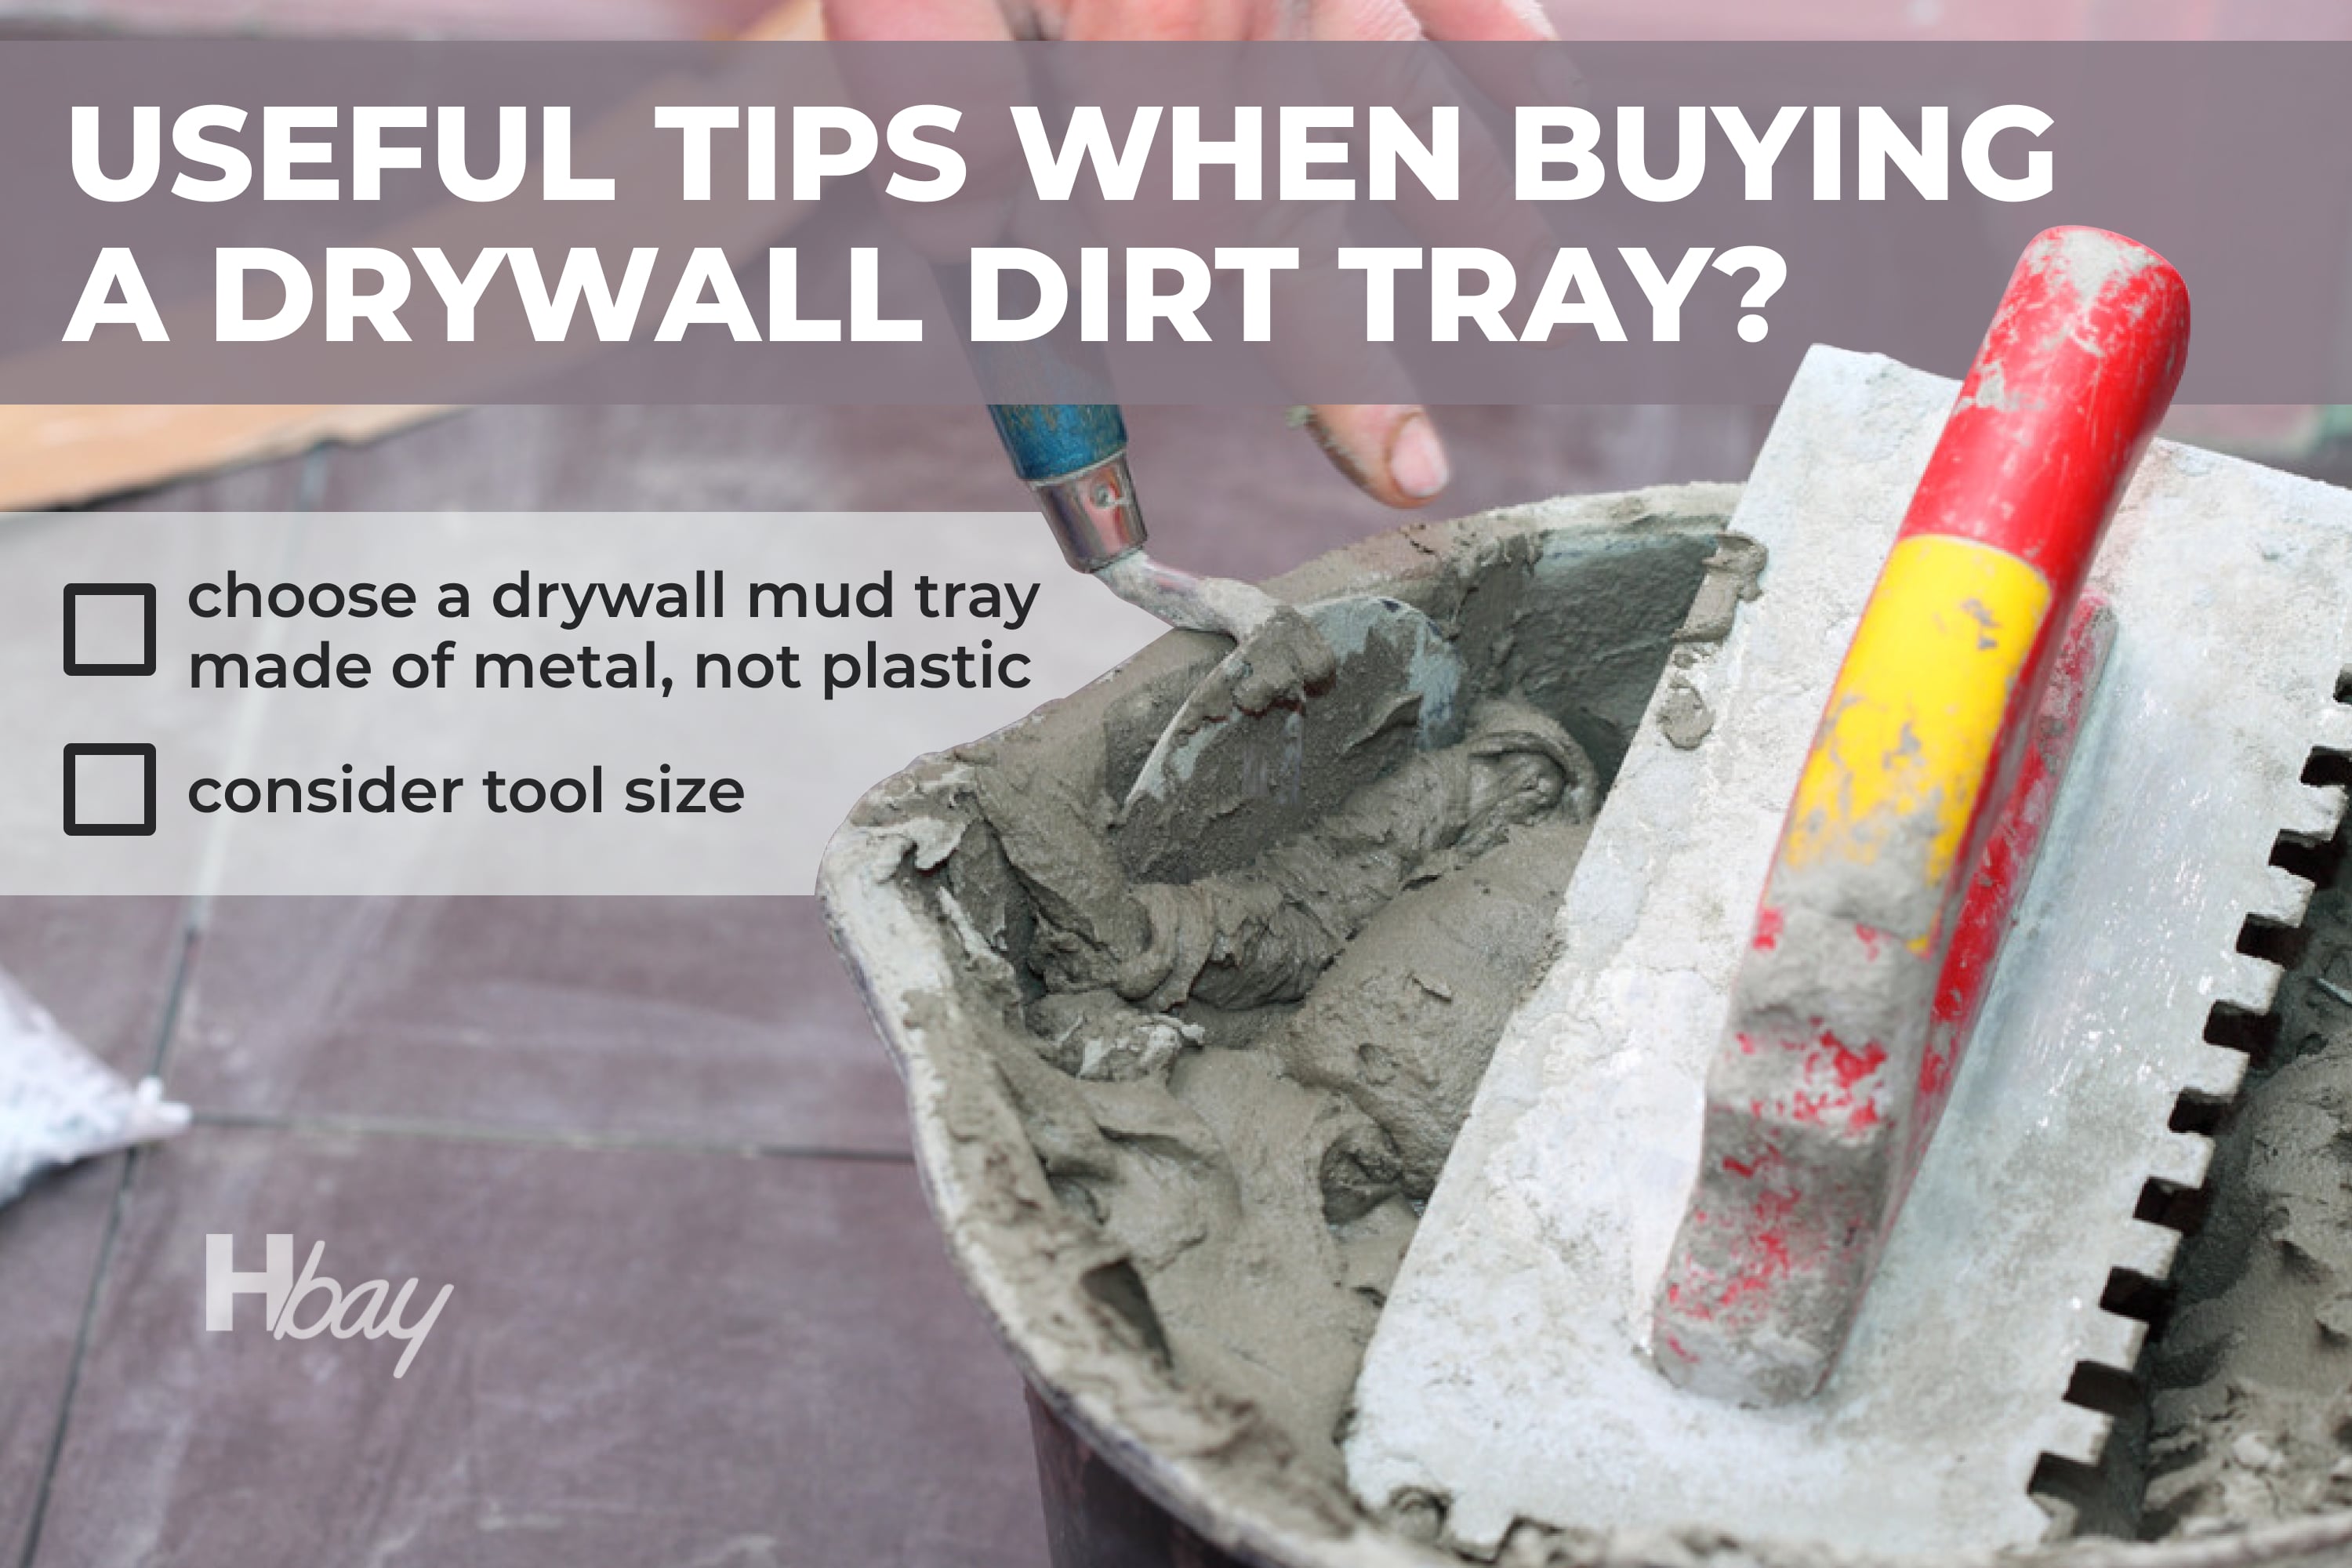 Useful tips when buying a drywall dirt tray